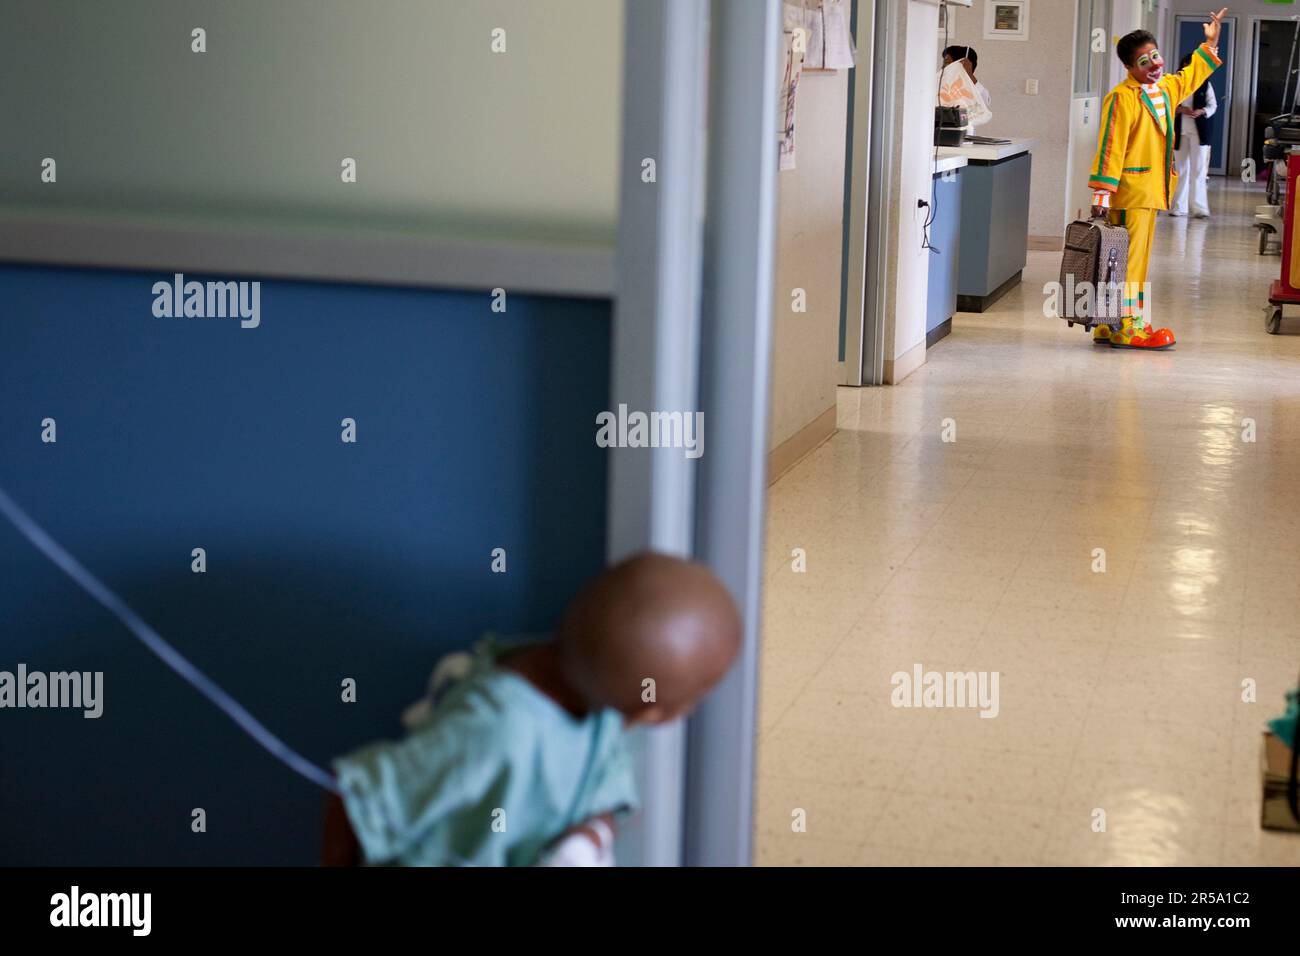 An evangelical Christian clown says goodbye to a child with leukemia at a hospital in Oaxaca, Mexico. Stock Photo